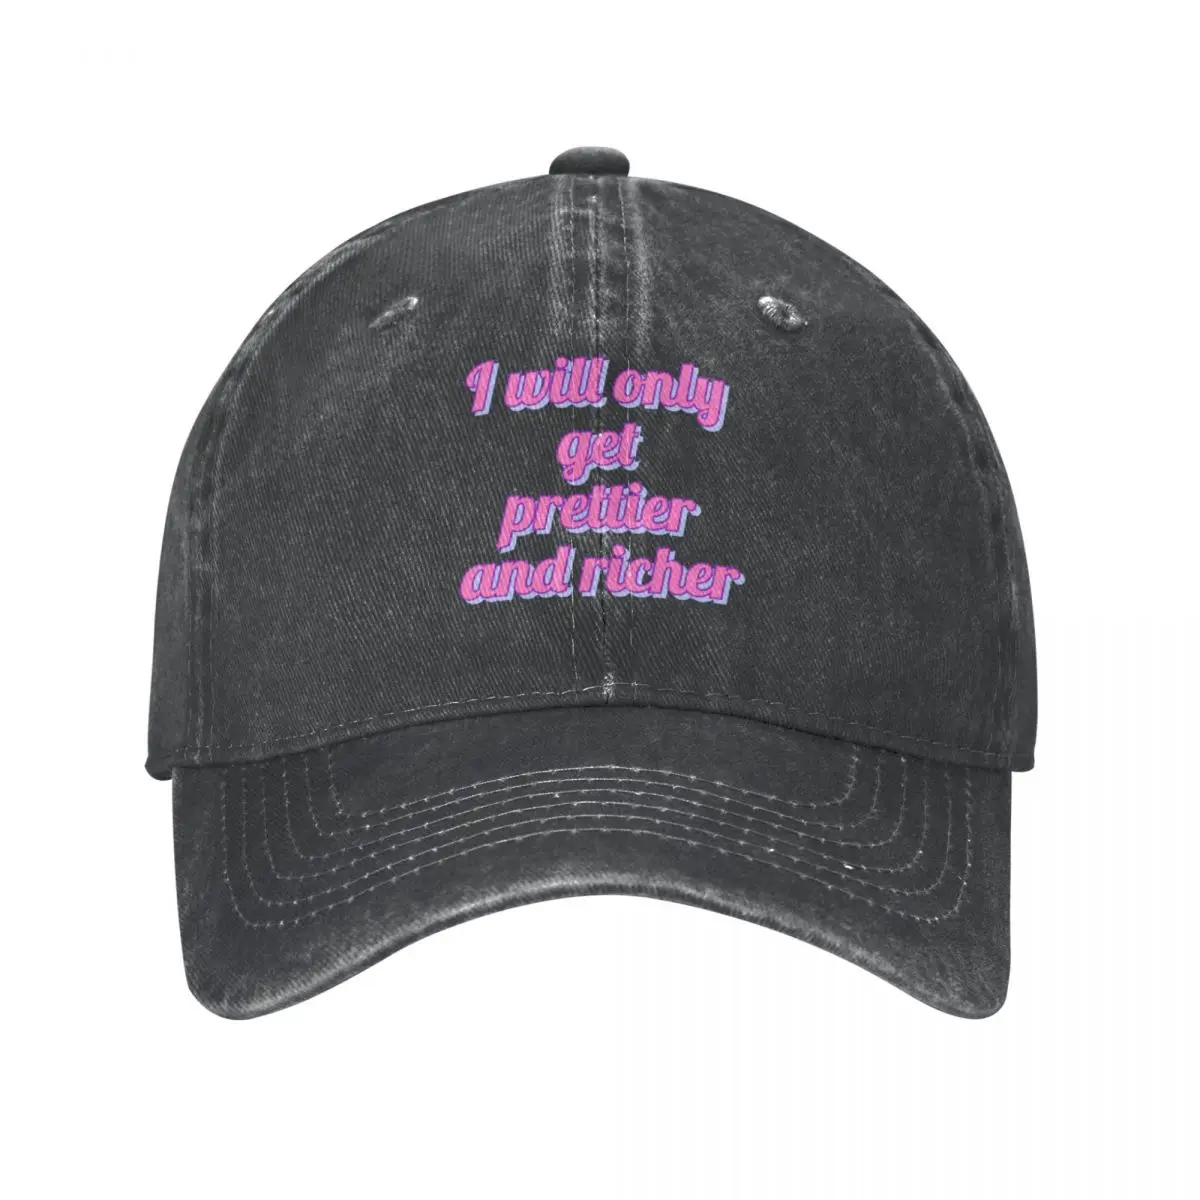 

I will only get prettier and richer Cowboy Hat Bobble vintage christmas Cap male golf women Men's